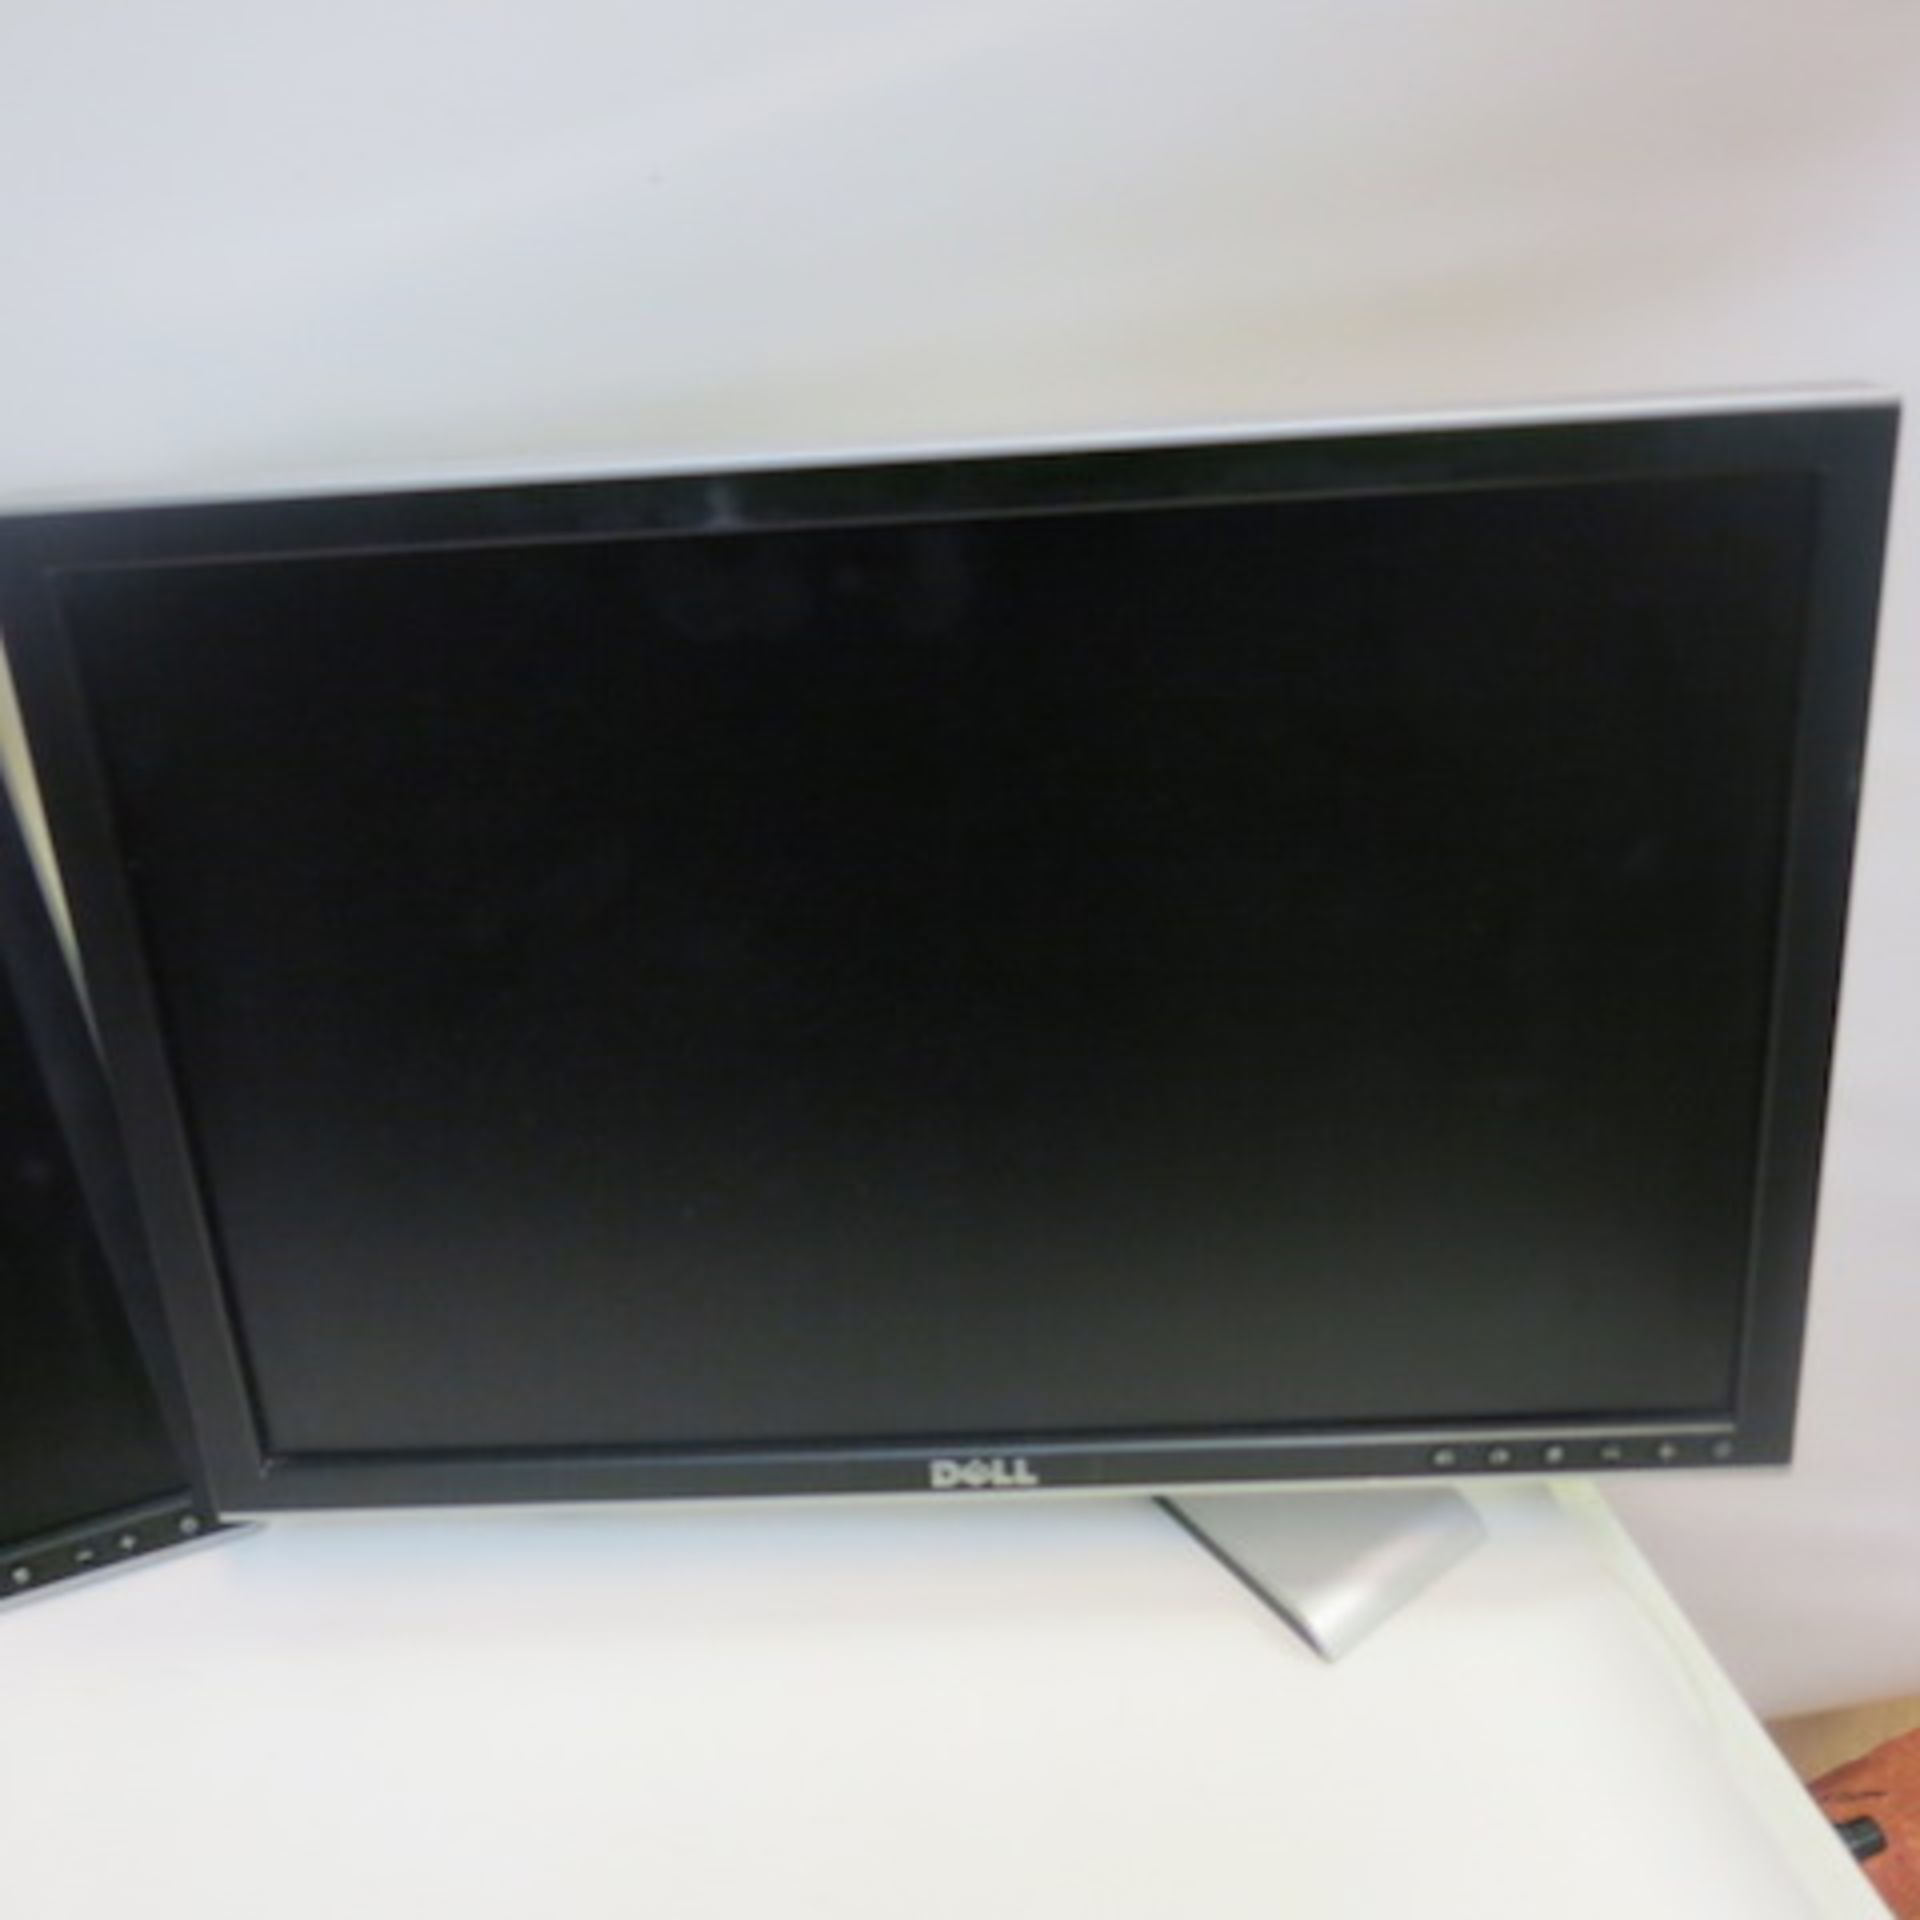 4 x Dell Monitors - 2 x22", 1 x 20", 1 x 17" (As Viewed) - Image 3 of 6